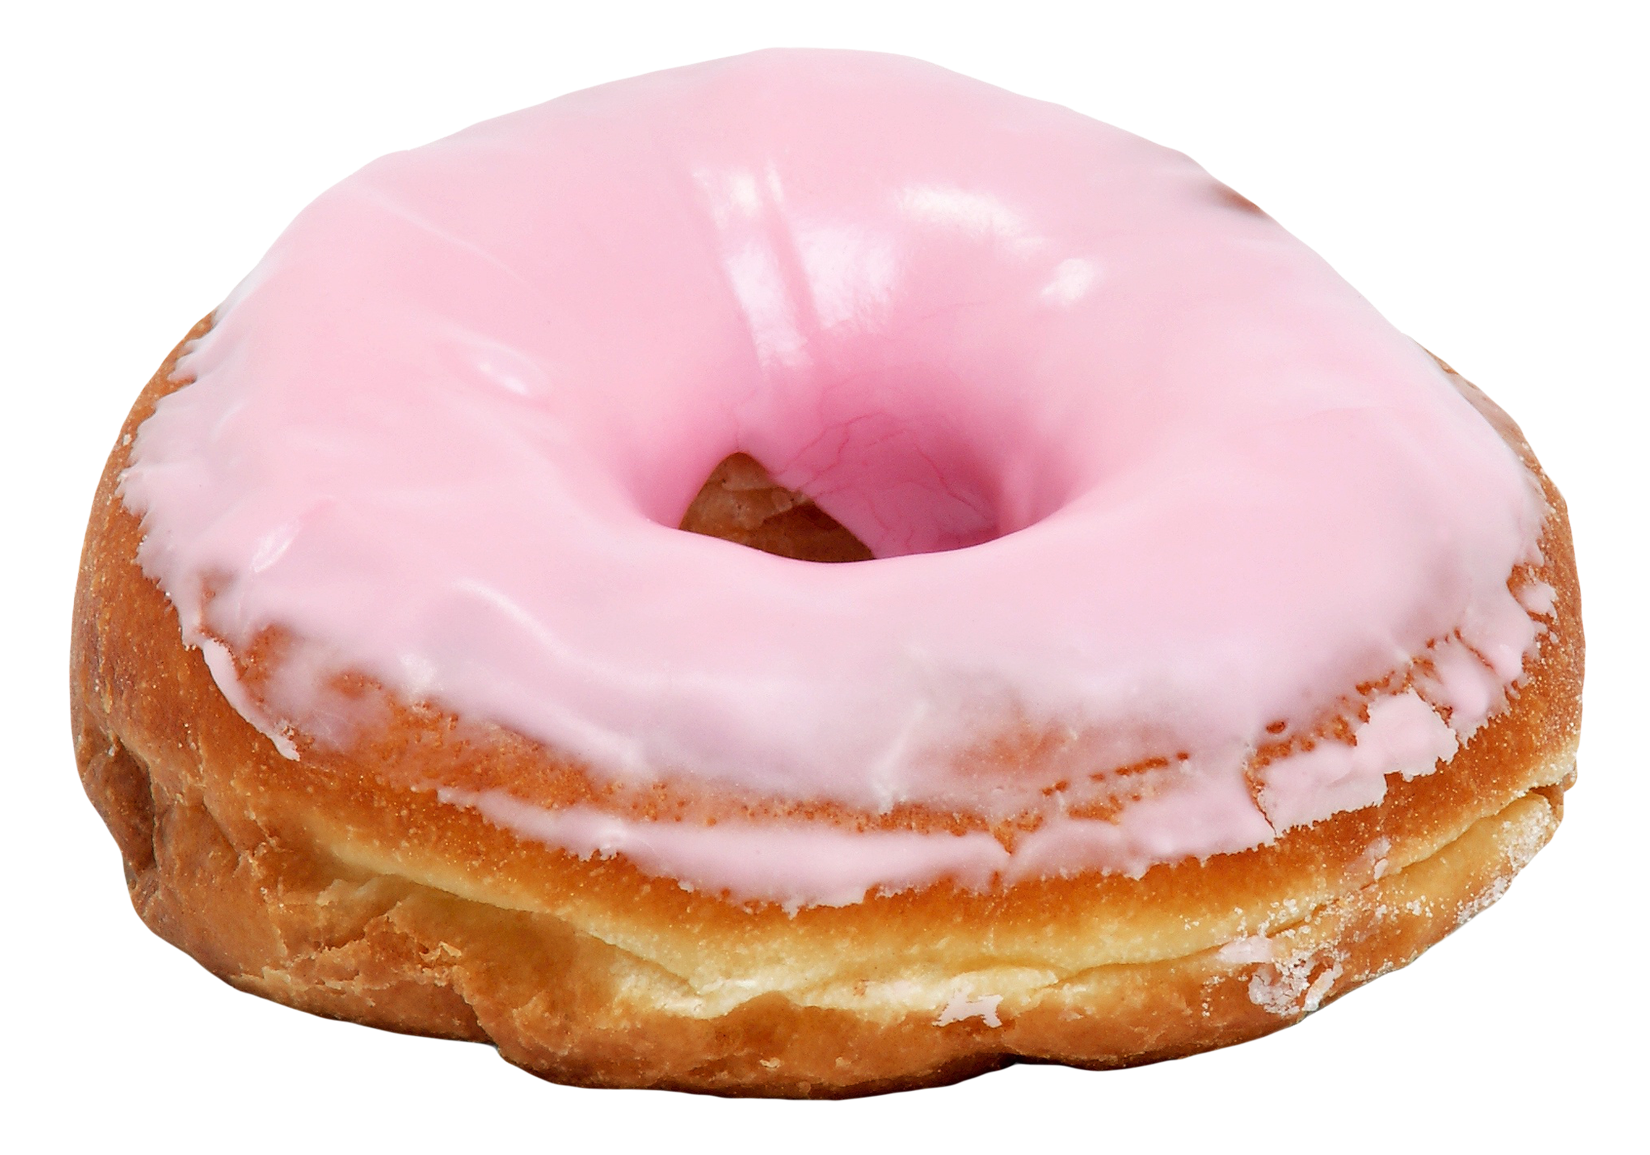 Pink Frosted Donut Isolated PNG image